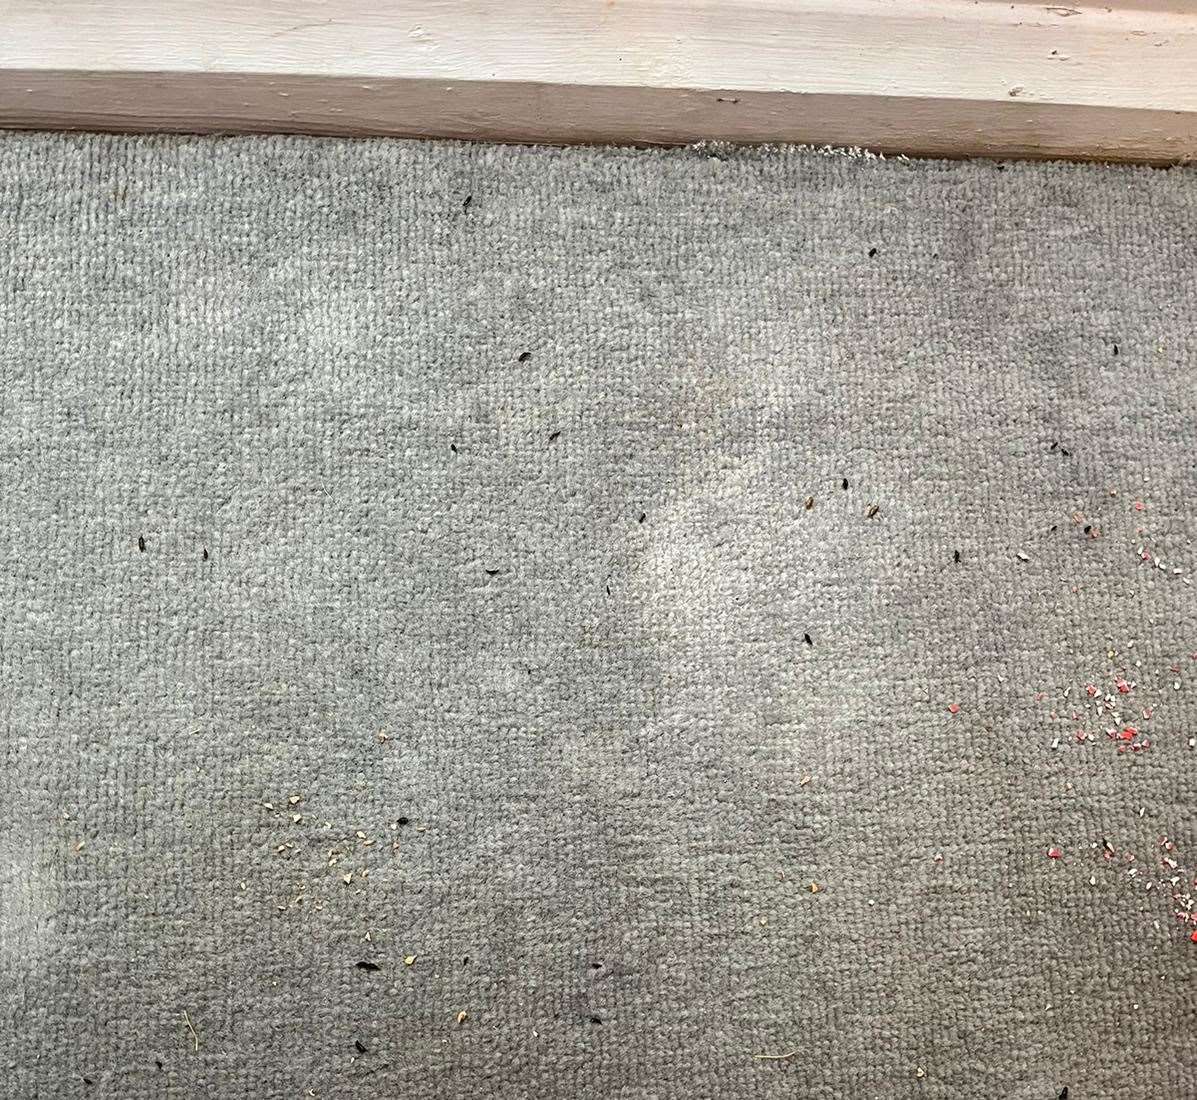 Mouse droppings on the mum's carpet, which she says she vacuums twice a day